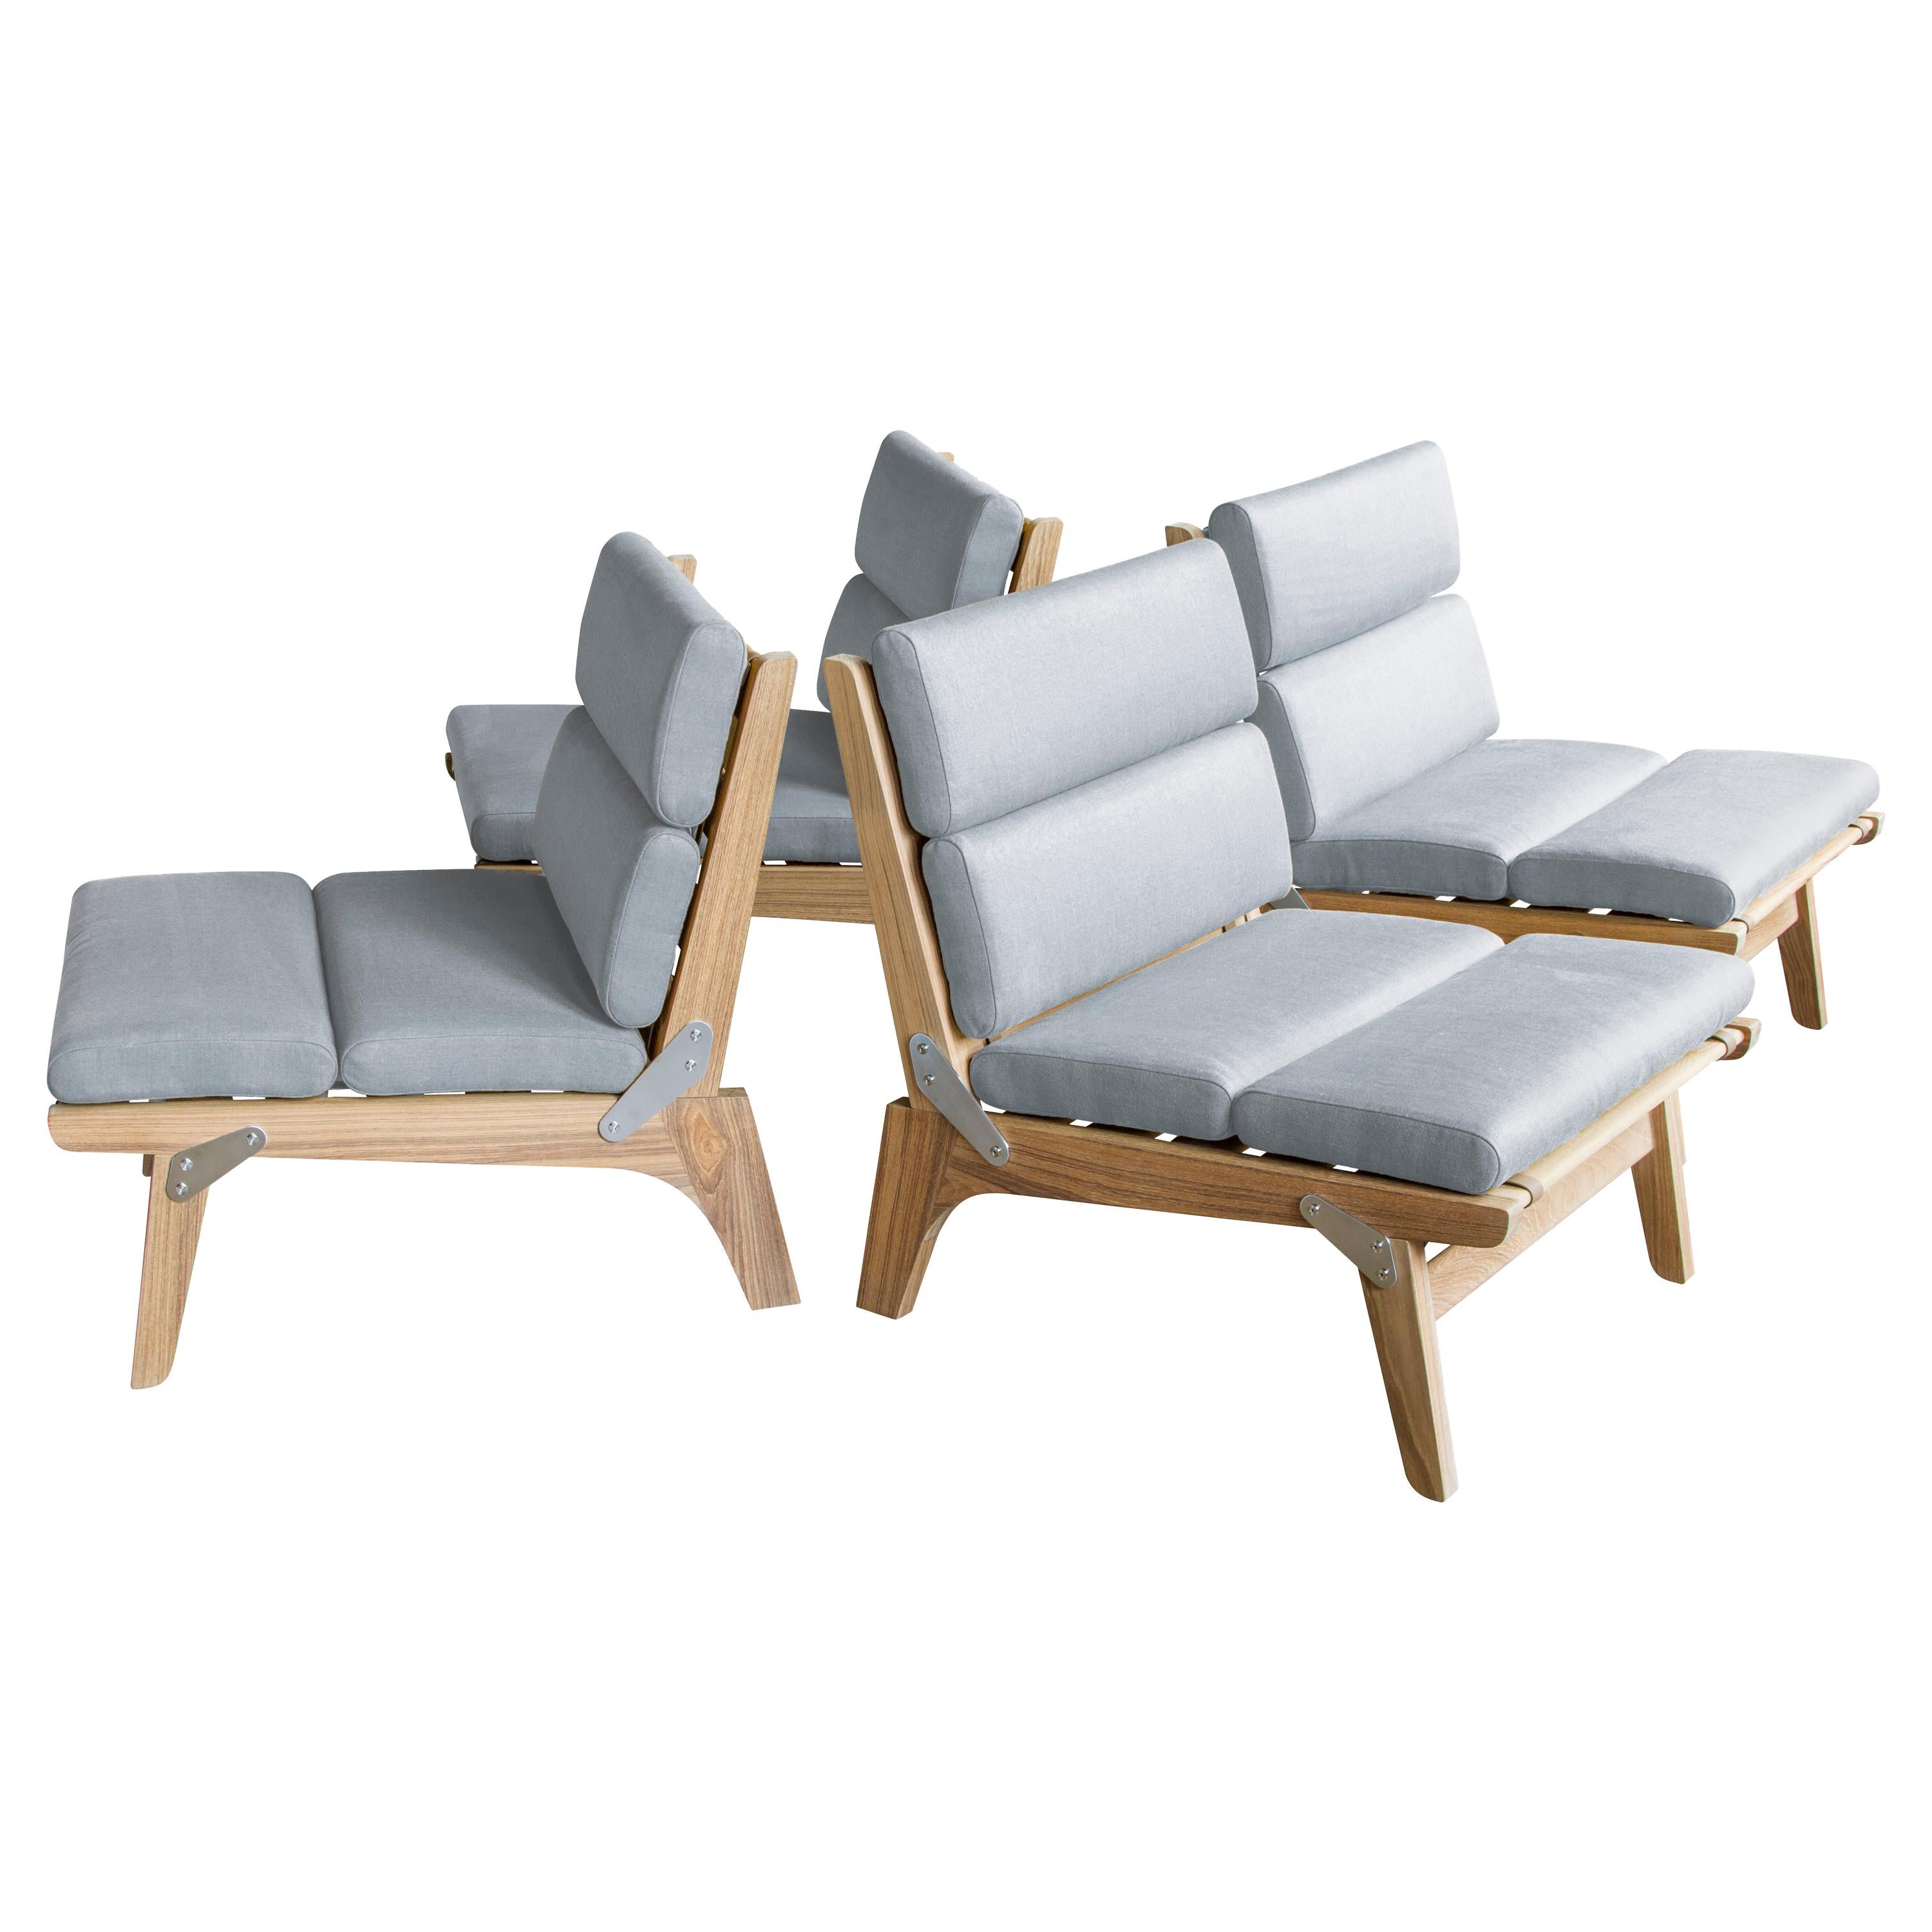 O.F.S. Lounge Chair / folding, outdoor - handcrafted by Richard Wrightman Design